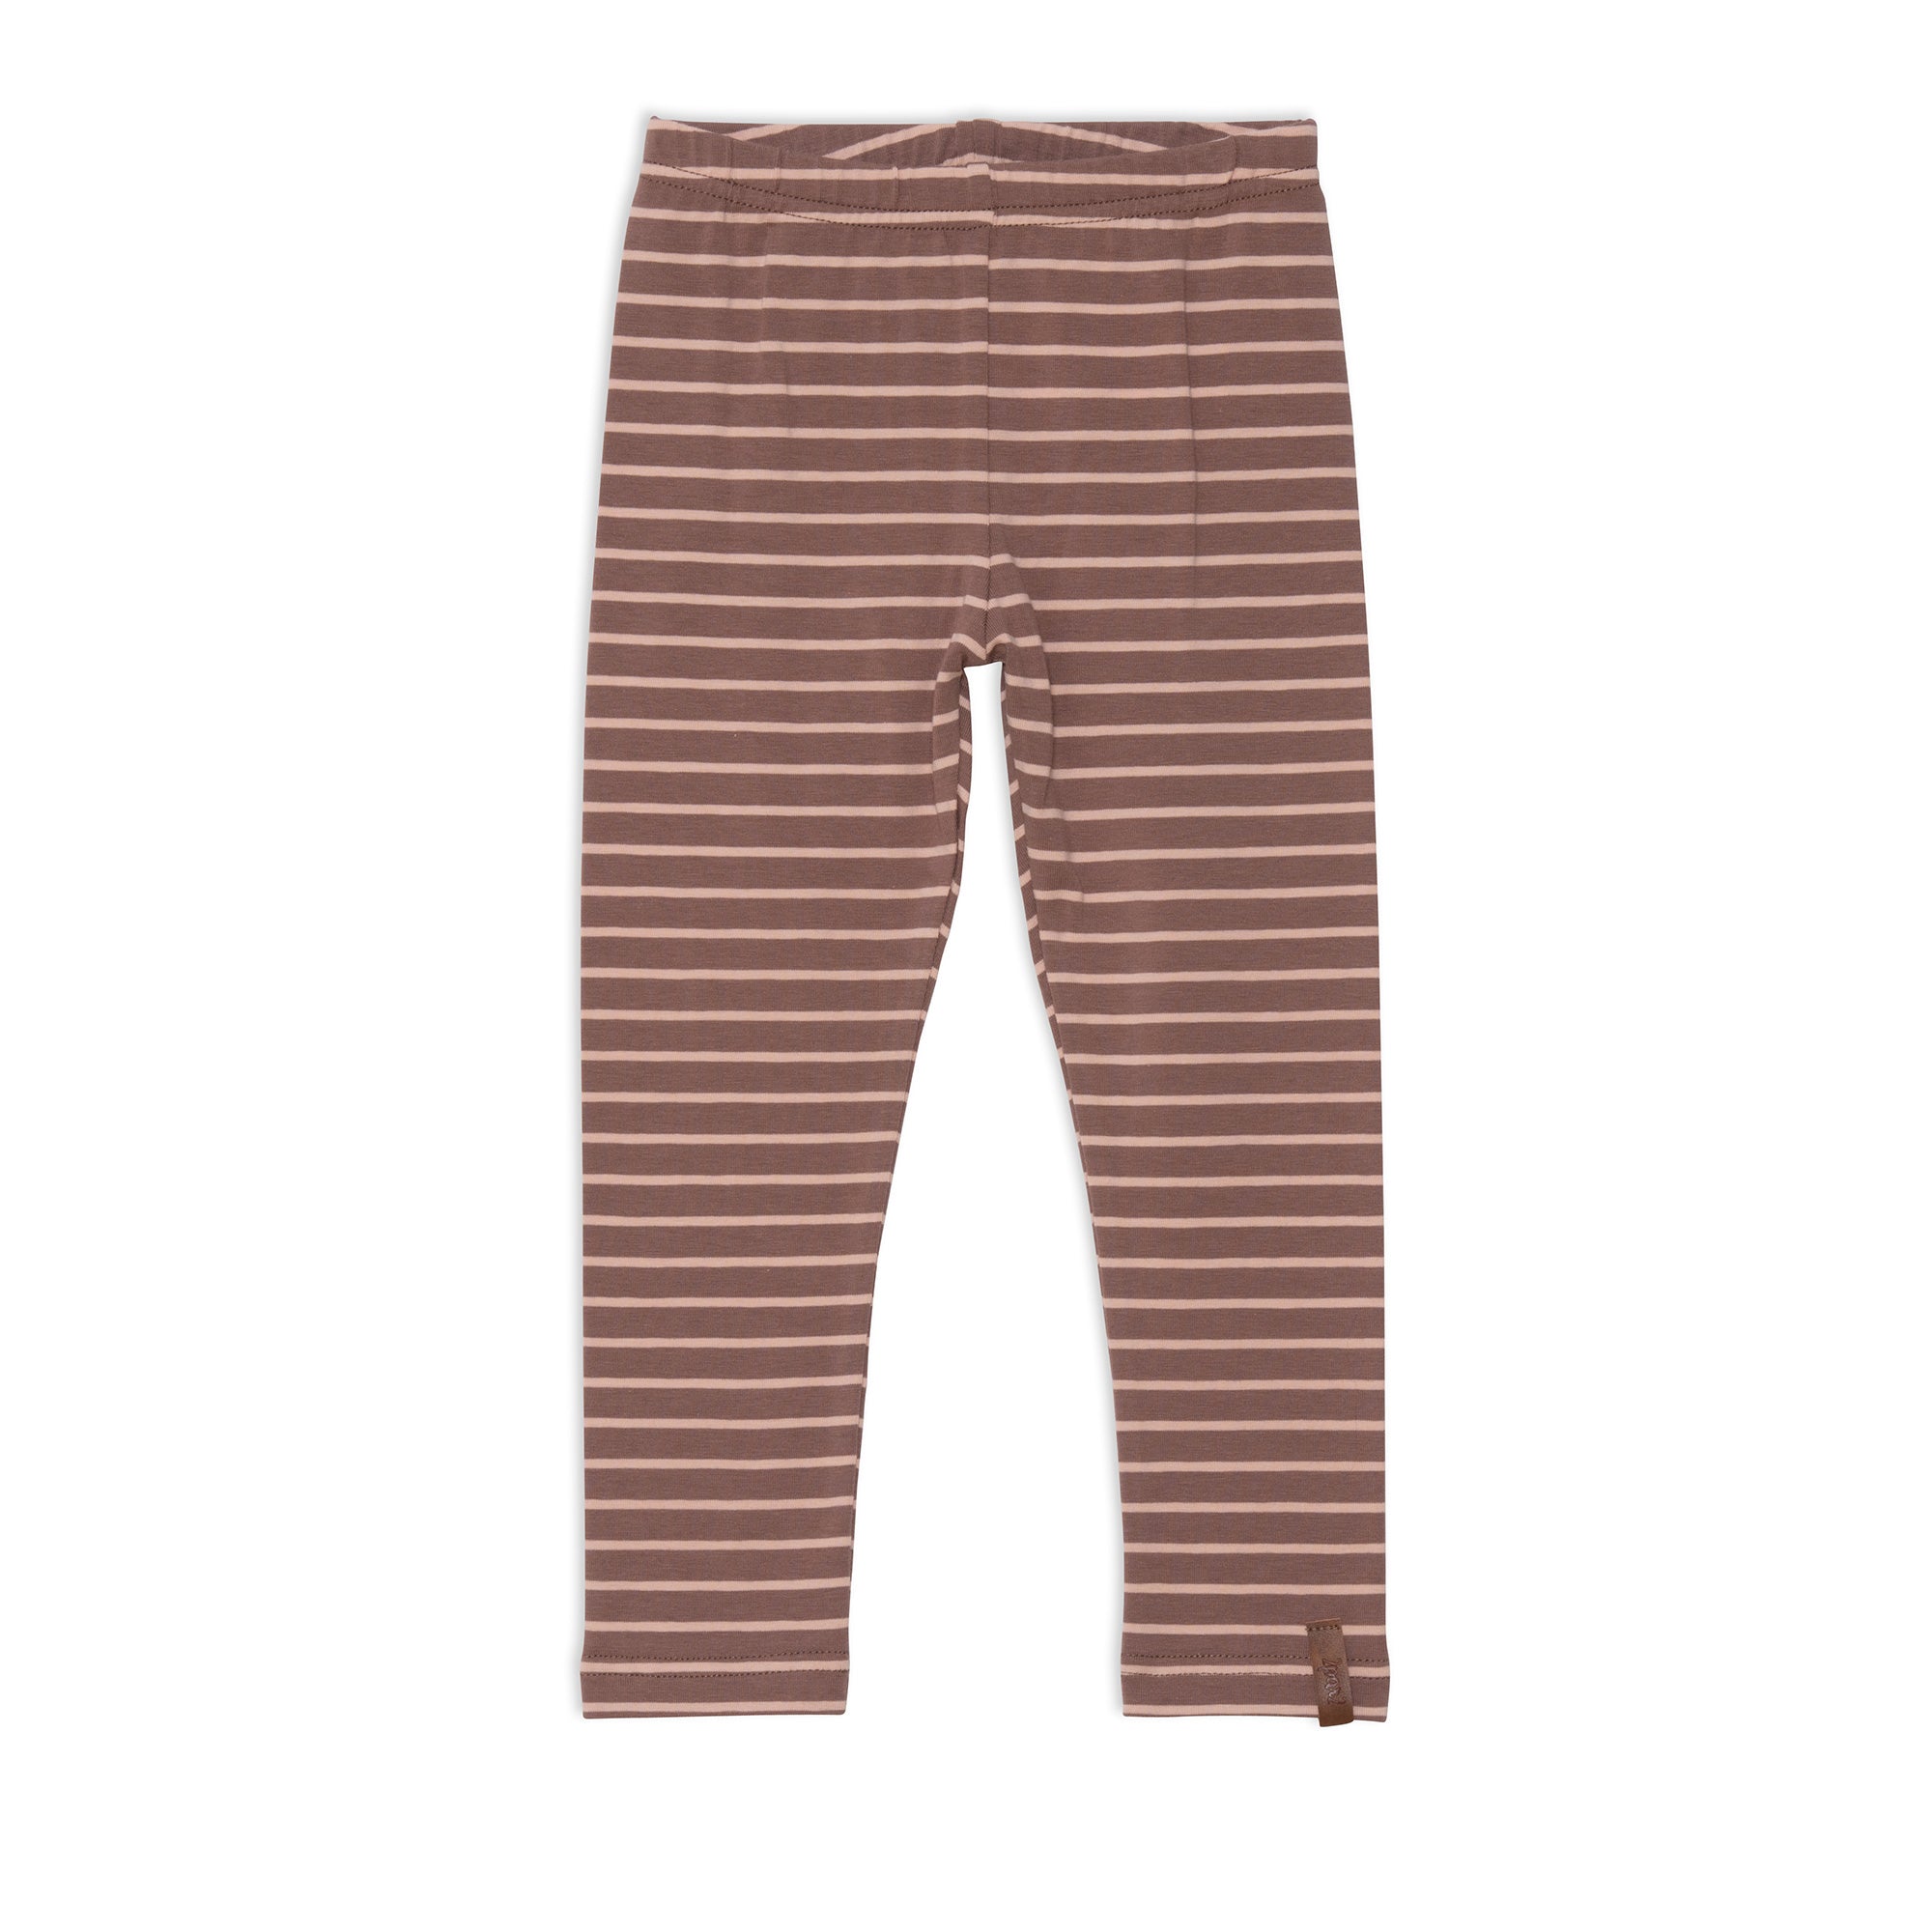 Cotton Legging Striped Brown And Pink